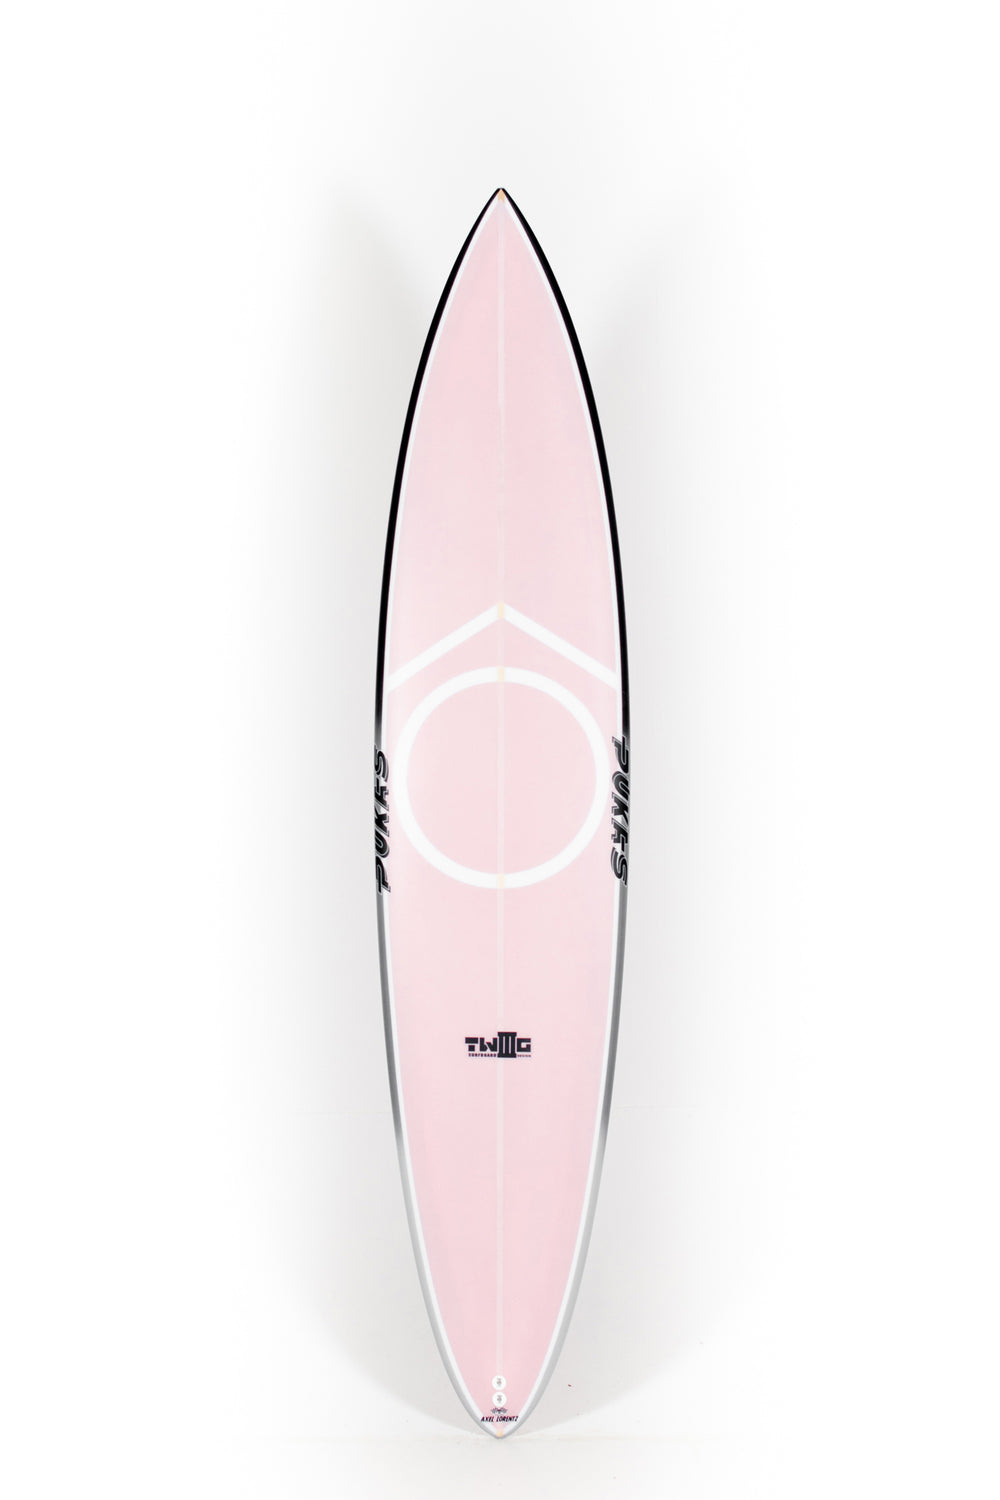 Pukas Surf shop - Pukas Surfboard - TWIG CHARGER by Axel Lorentz - 8´0” x 20,13 x 3,25 - 52,55L  AX06173